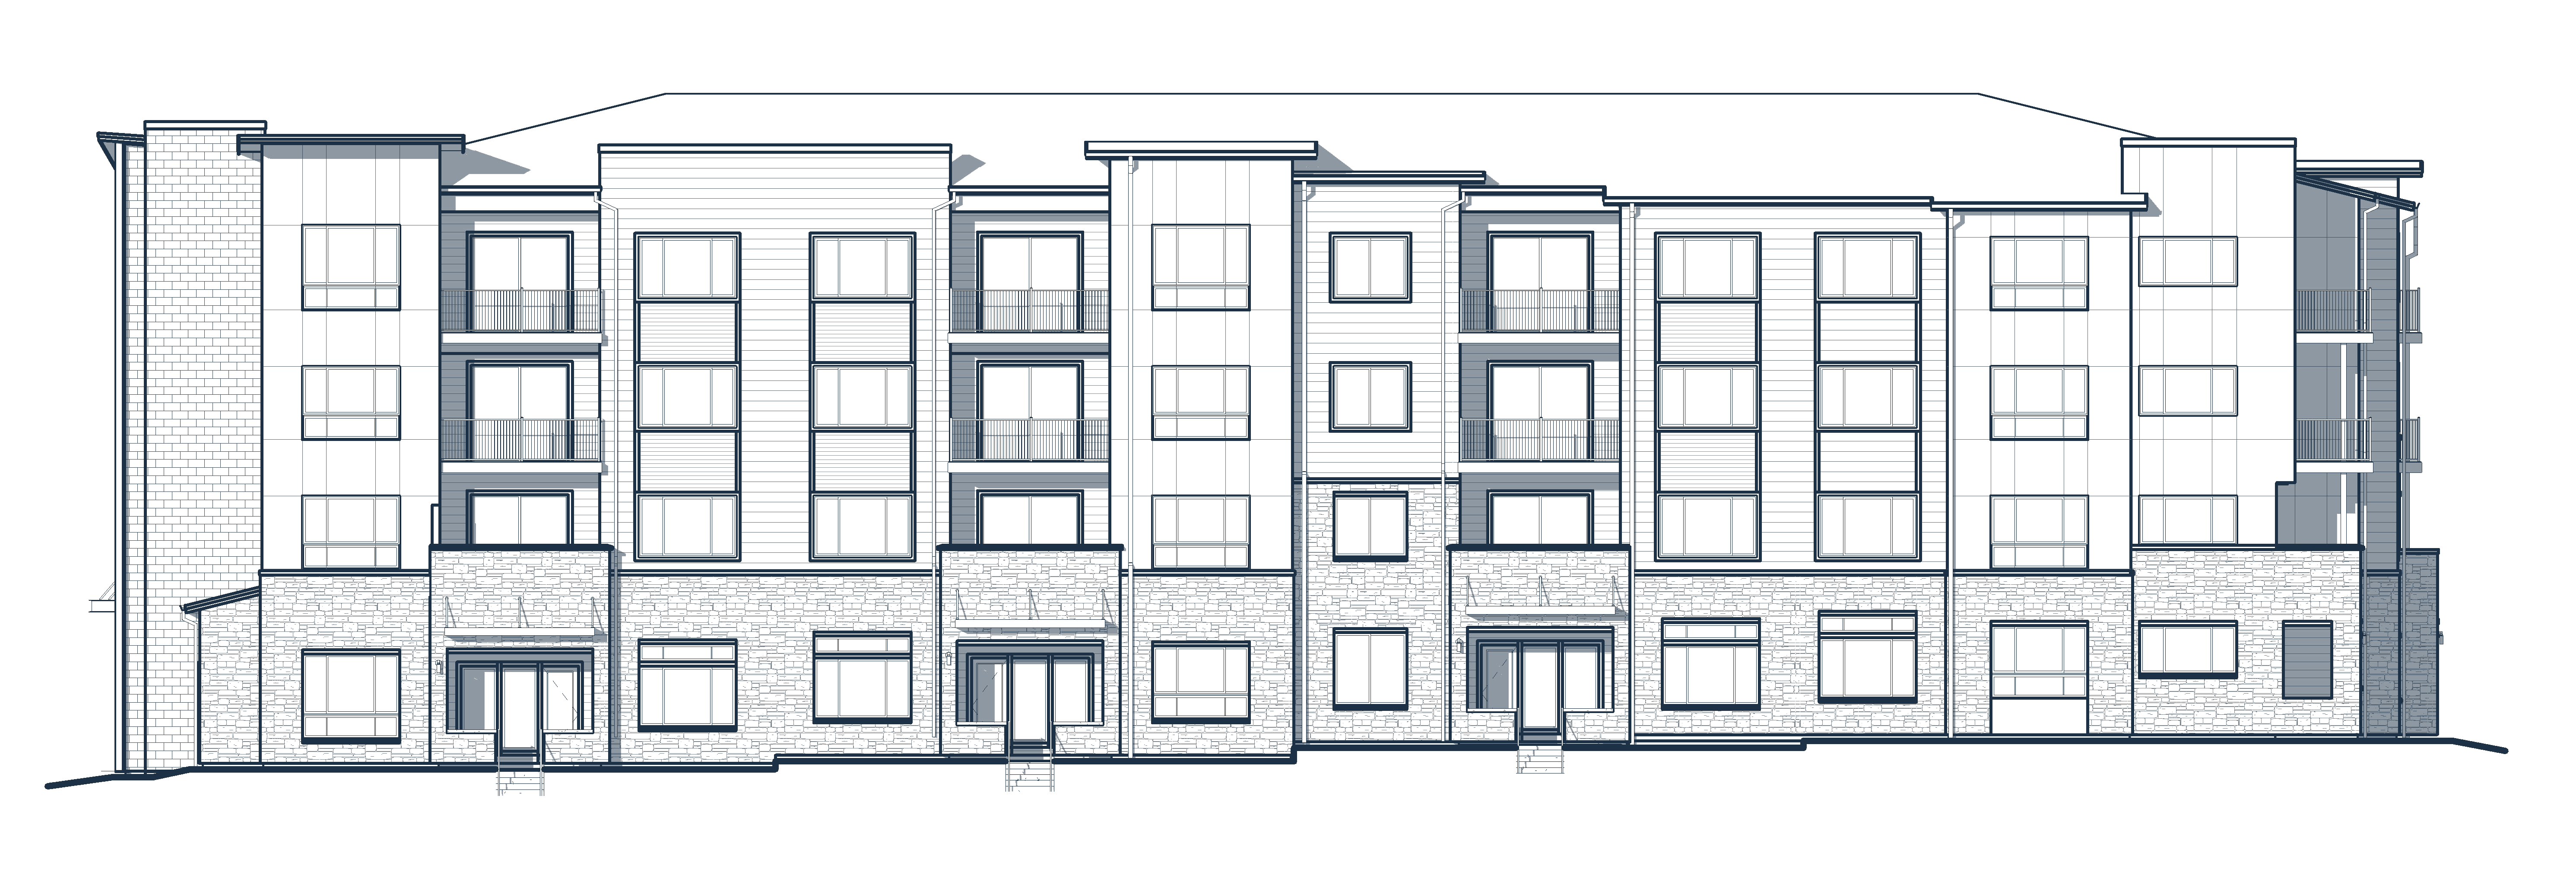 Concept Drawing: Apartments